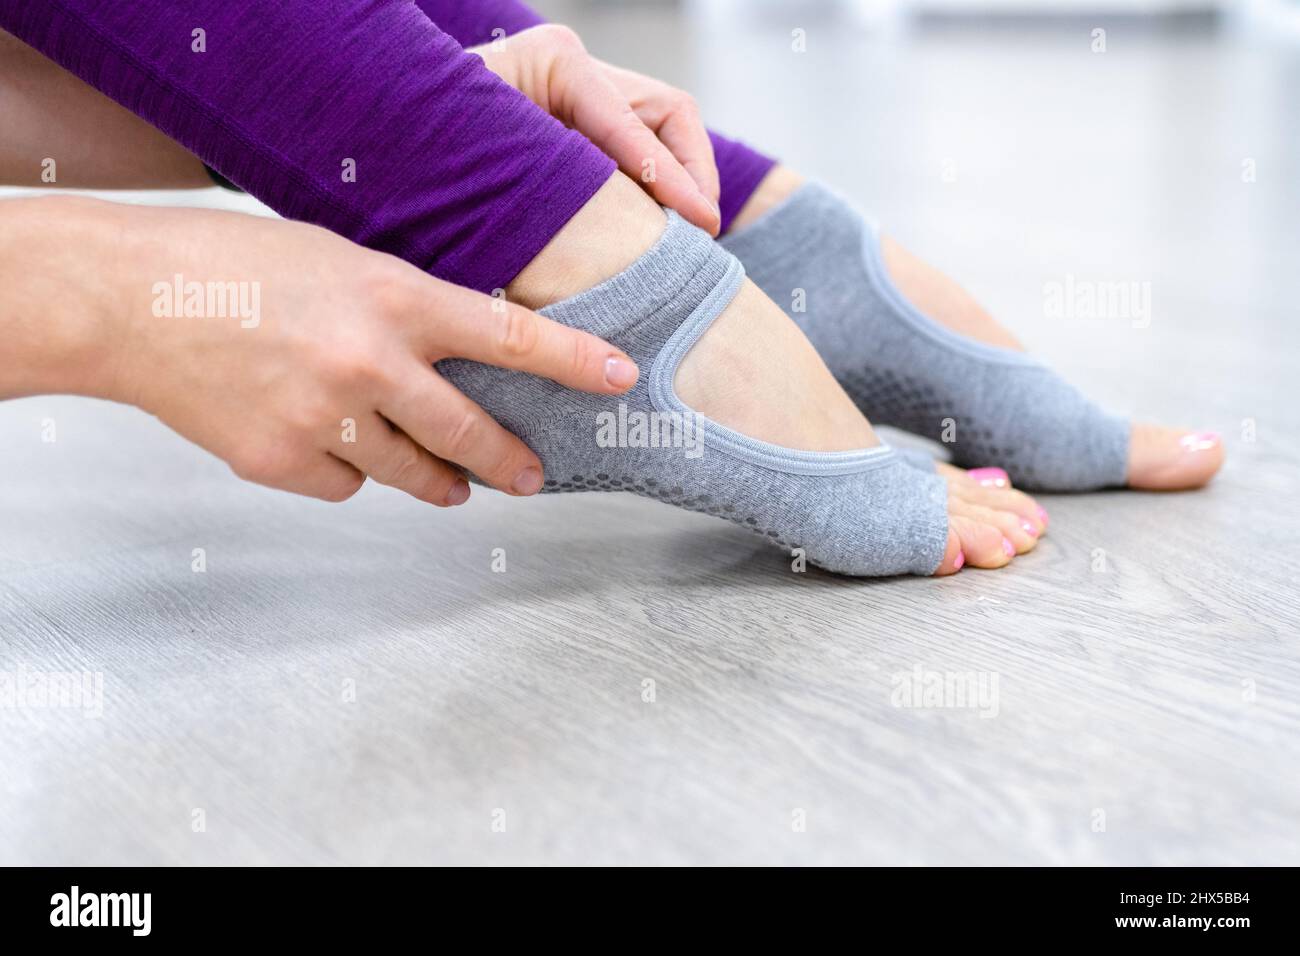 Close up Woman in purple leggings putting on her grey socks. Lady prepare for yoga workout. Concept of yoga accessories  Stock Photo